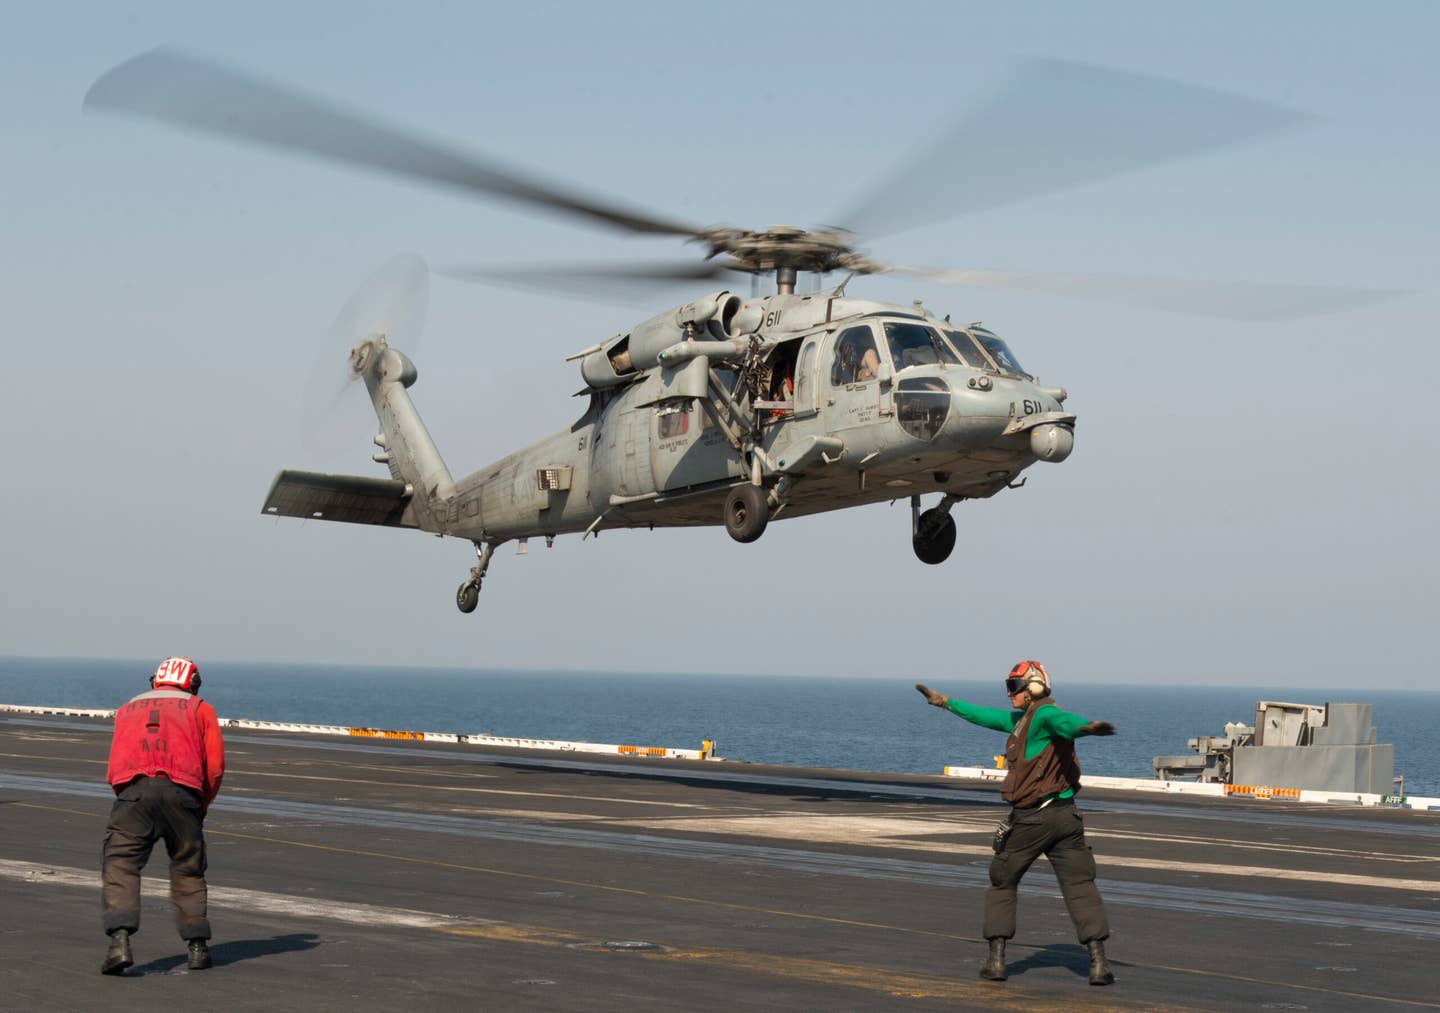 An MH-60S from Helicopter Sea Combat Squadron 6 lifts off the flight deck of the aircraft carrier USS <em>Nimitz</em>. <em>U.S. Navy photo by Mass Communication Seaman Bryant Lang</em>